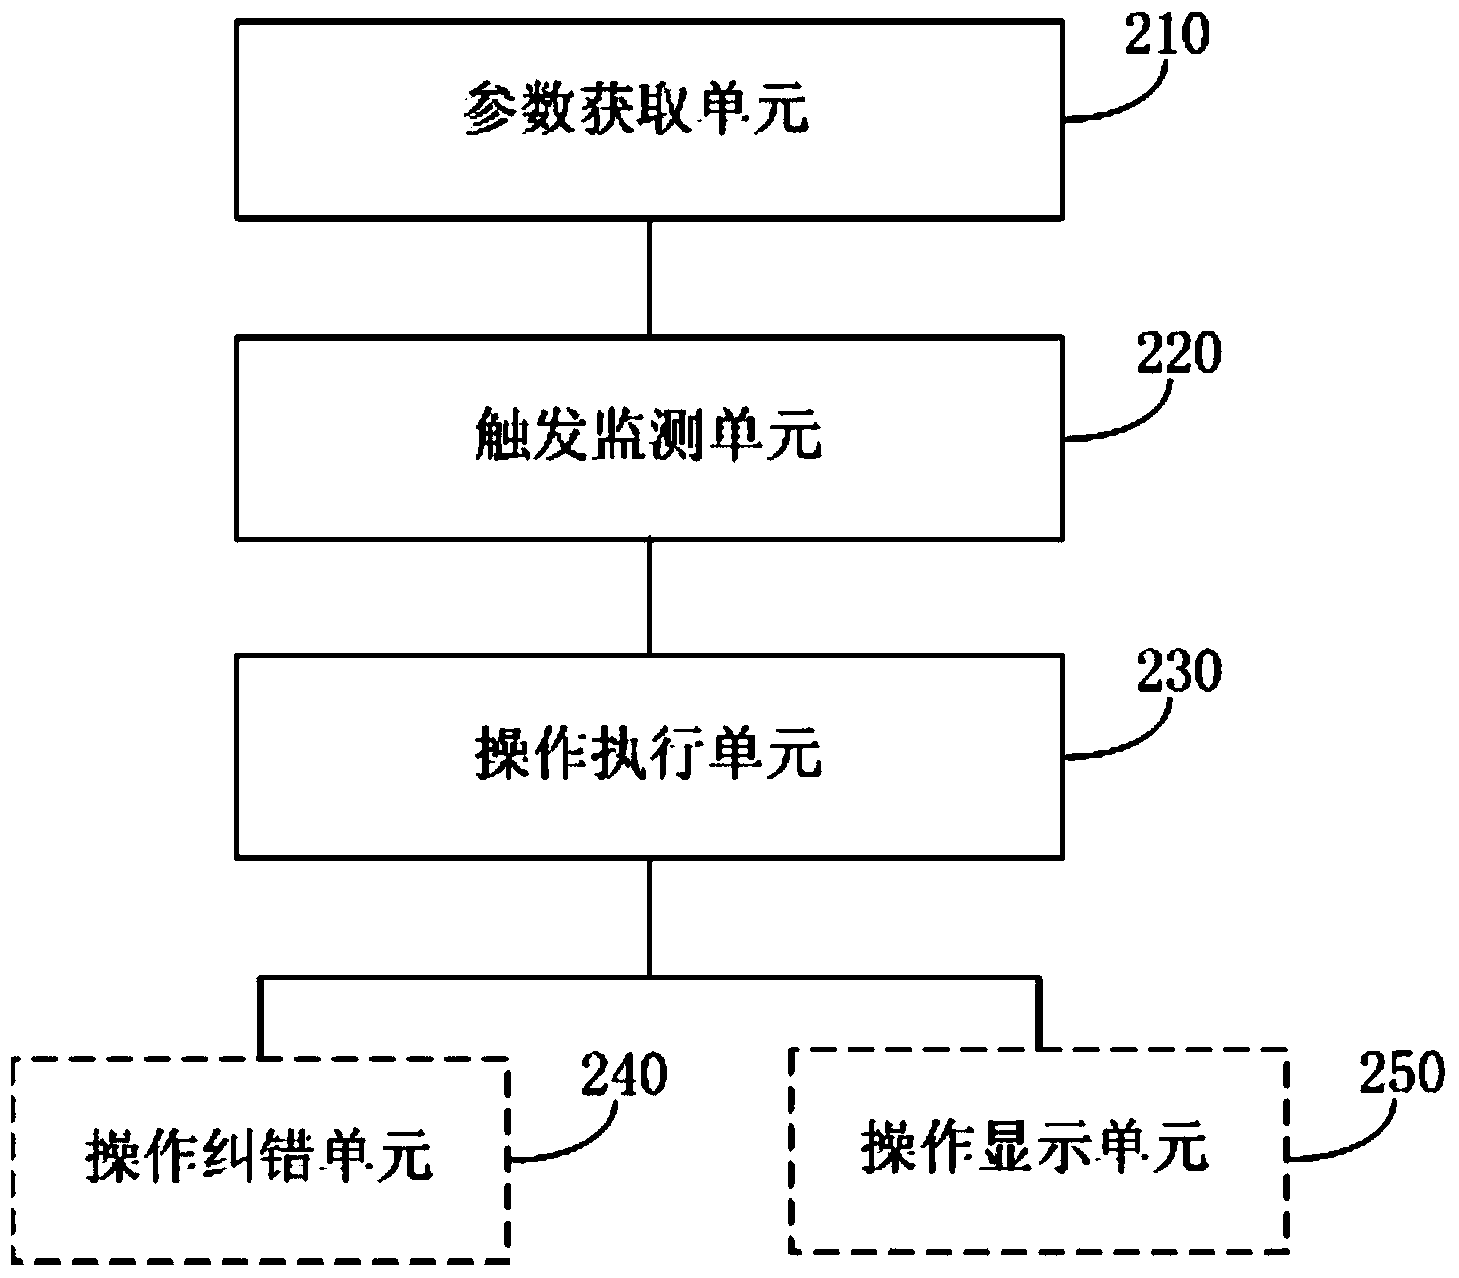 Application system management method and application system management device